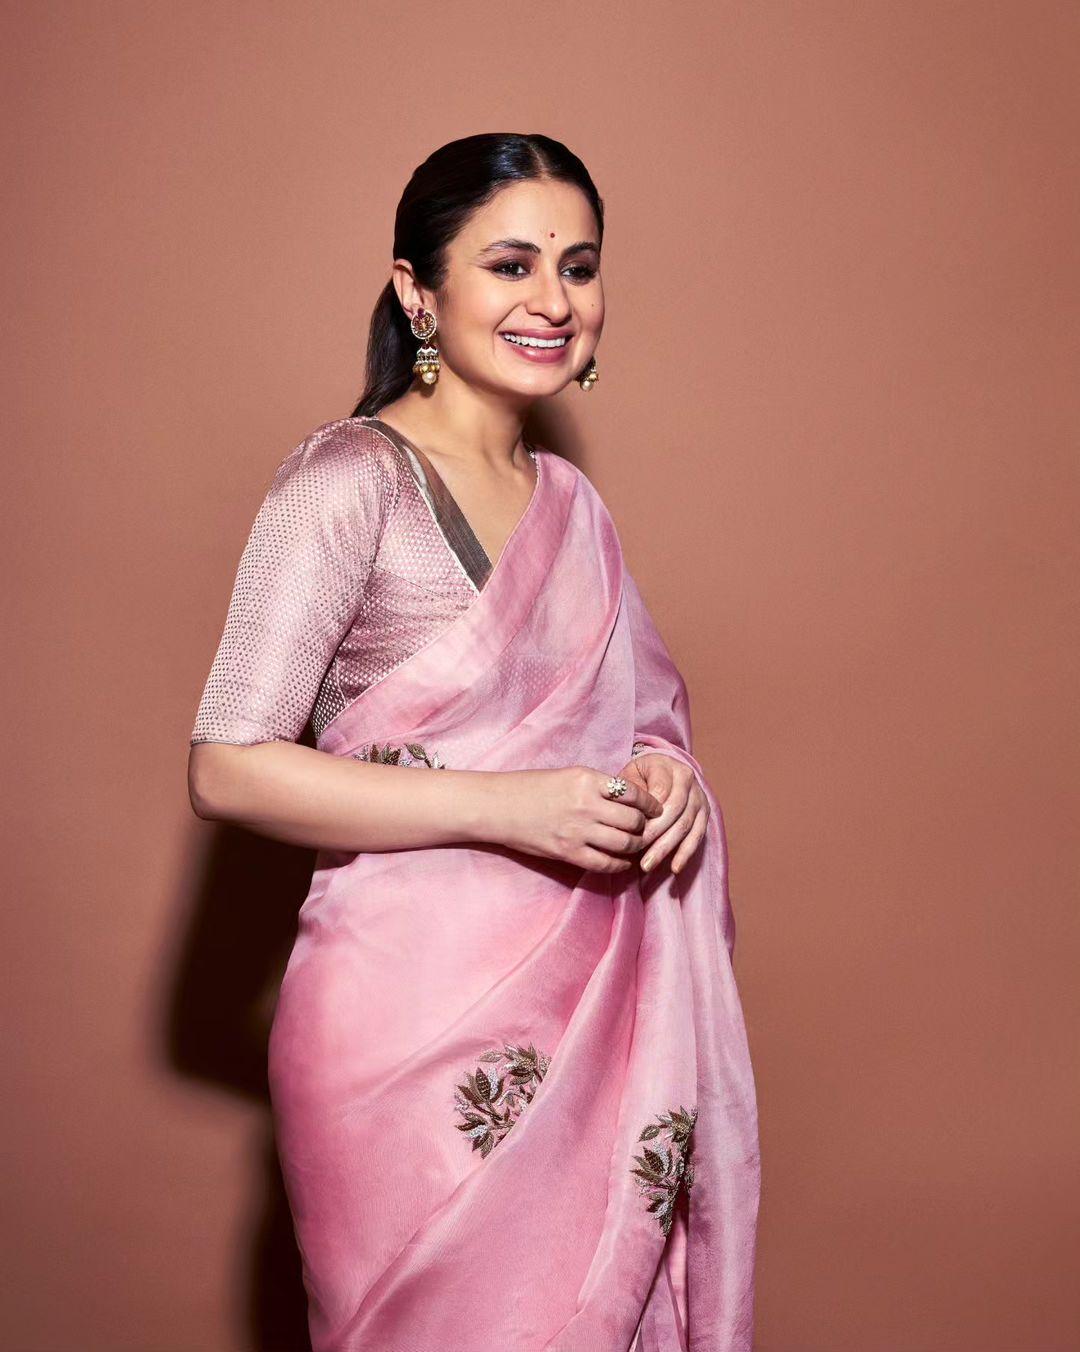 Rasika looked absolutely stunning in a beautiful pink saree, completely nailing the Indian barbie aesthetic.